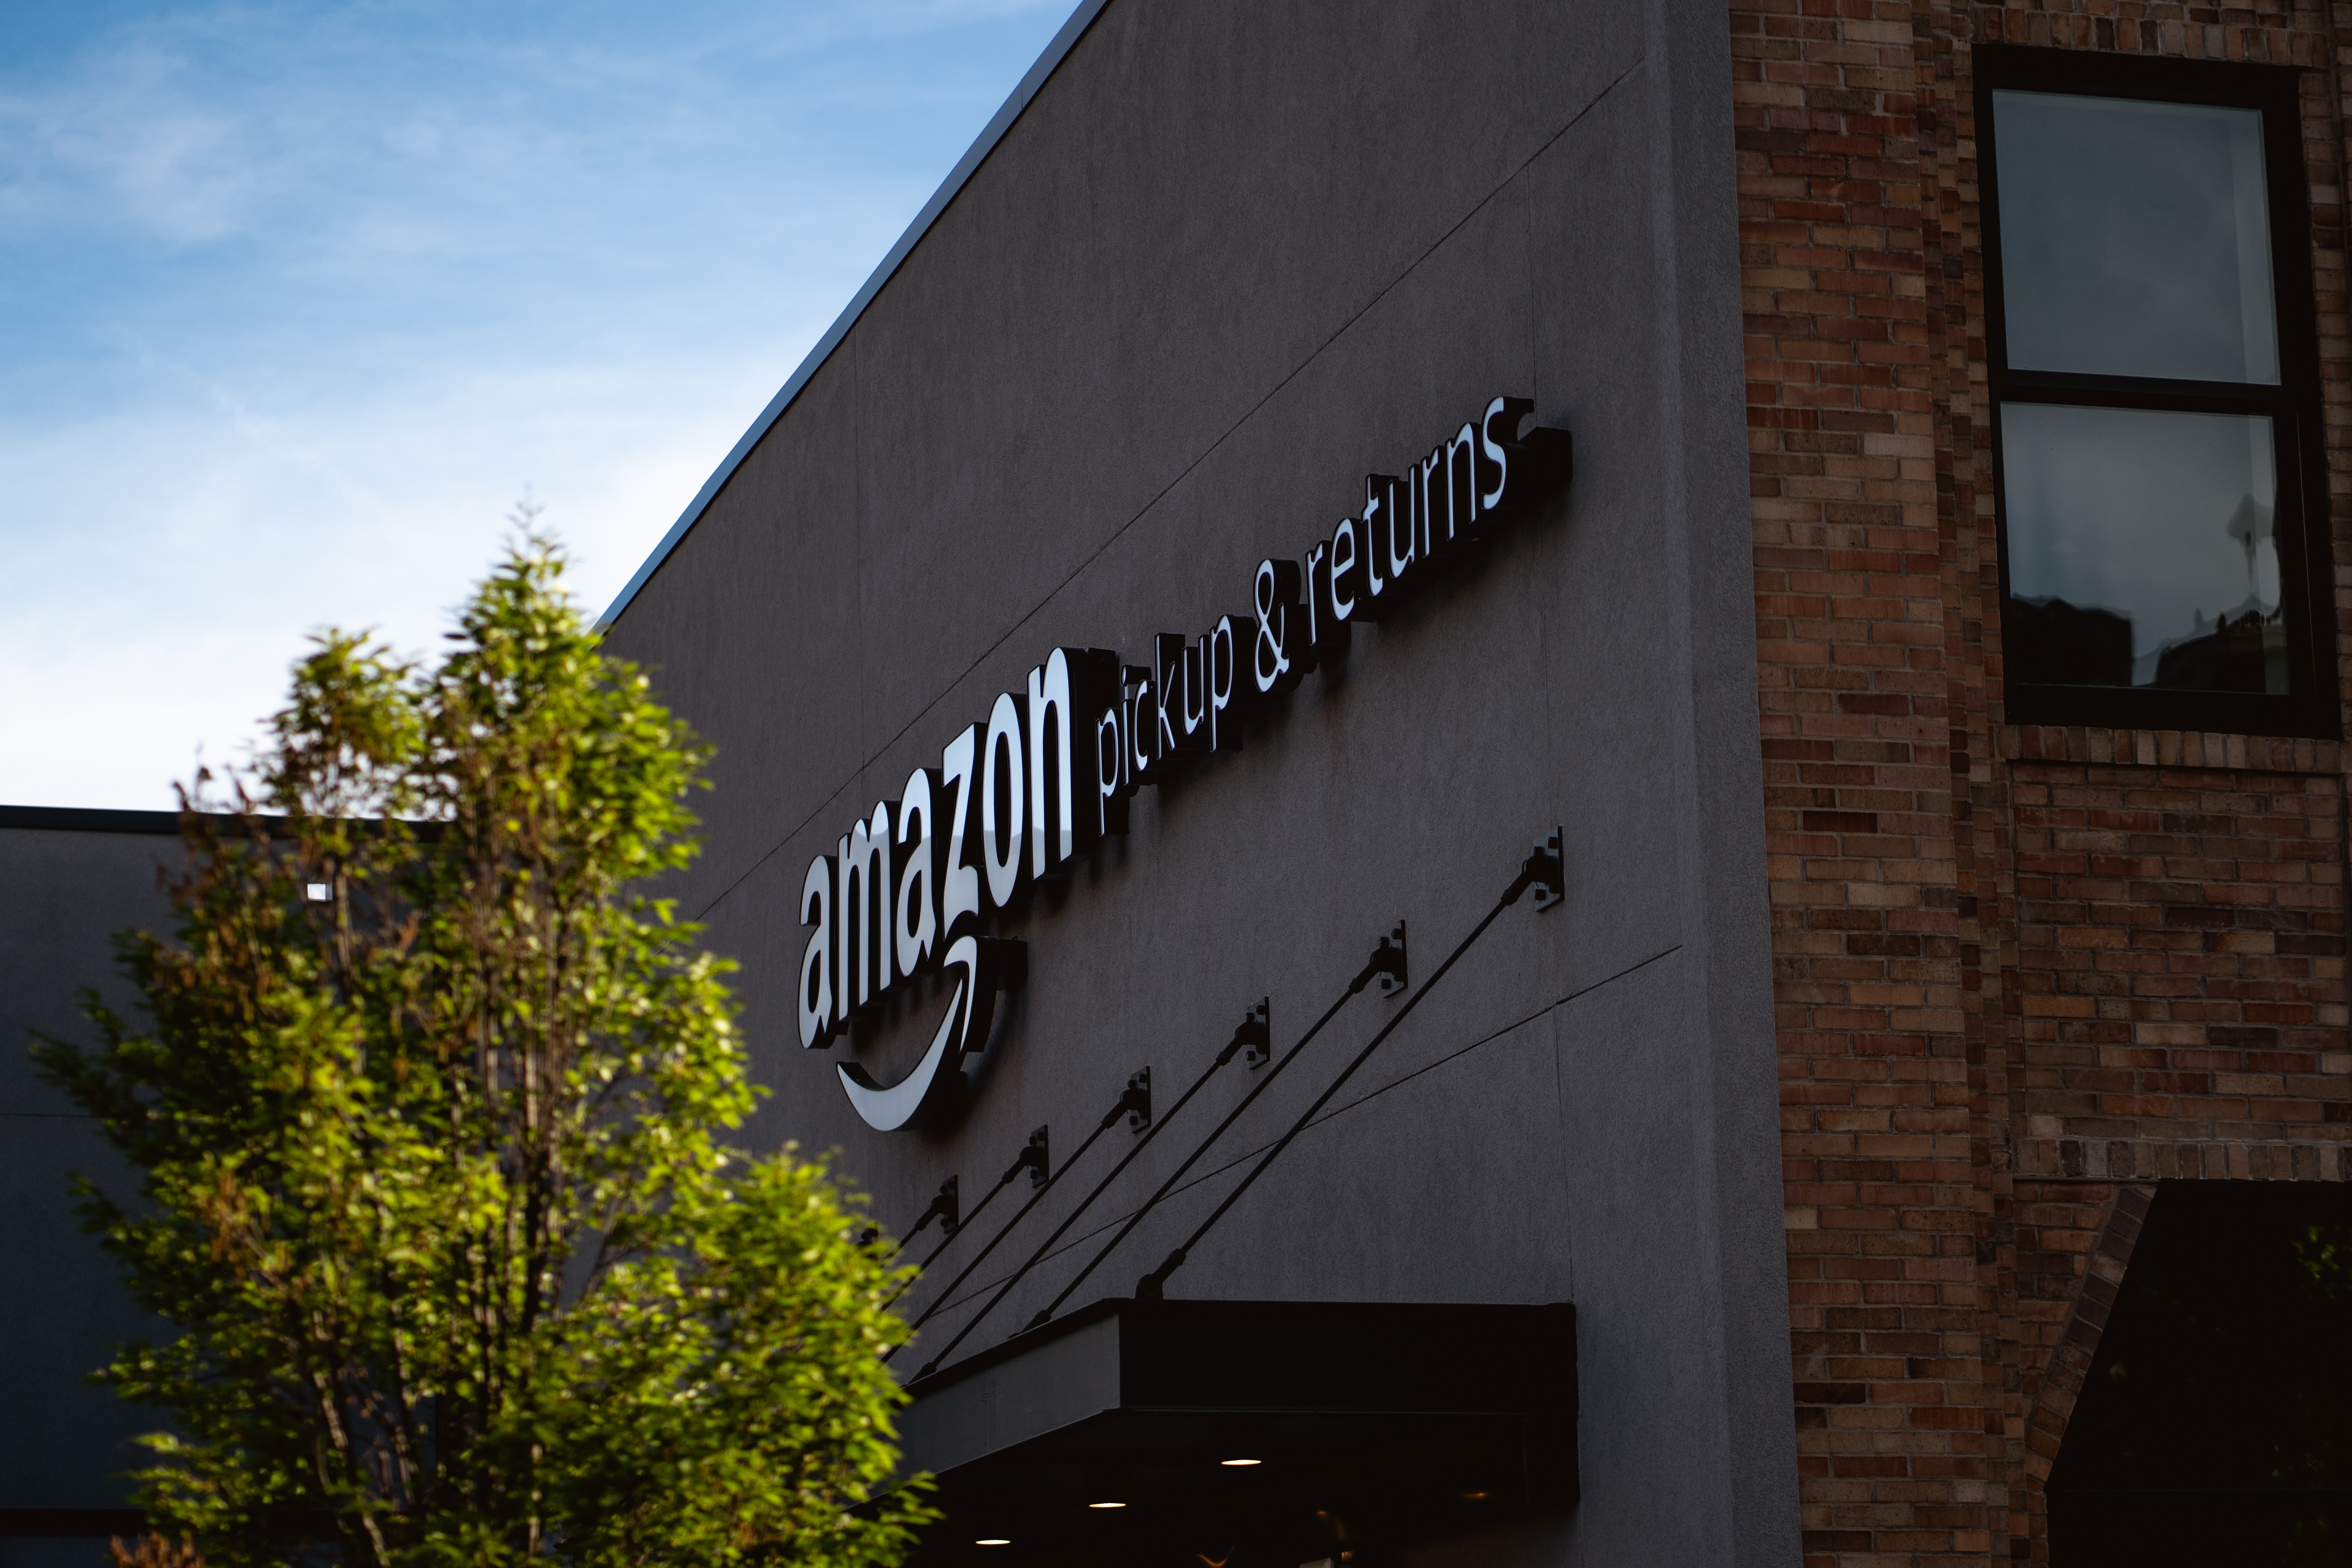 Amazon close to buying stakes in India’s third-largest retailer Future Group to go offline